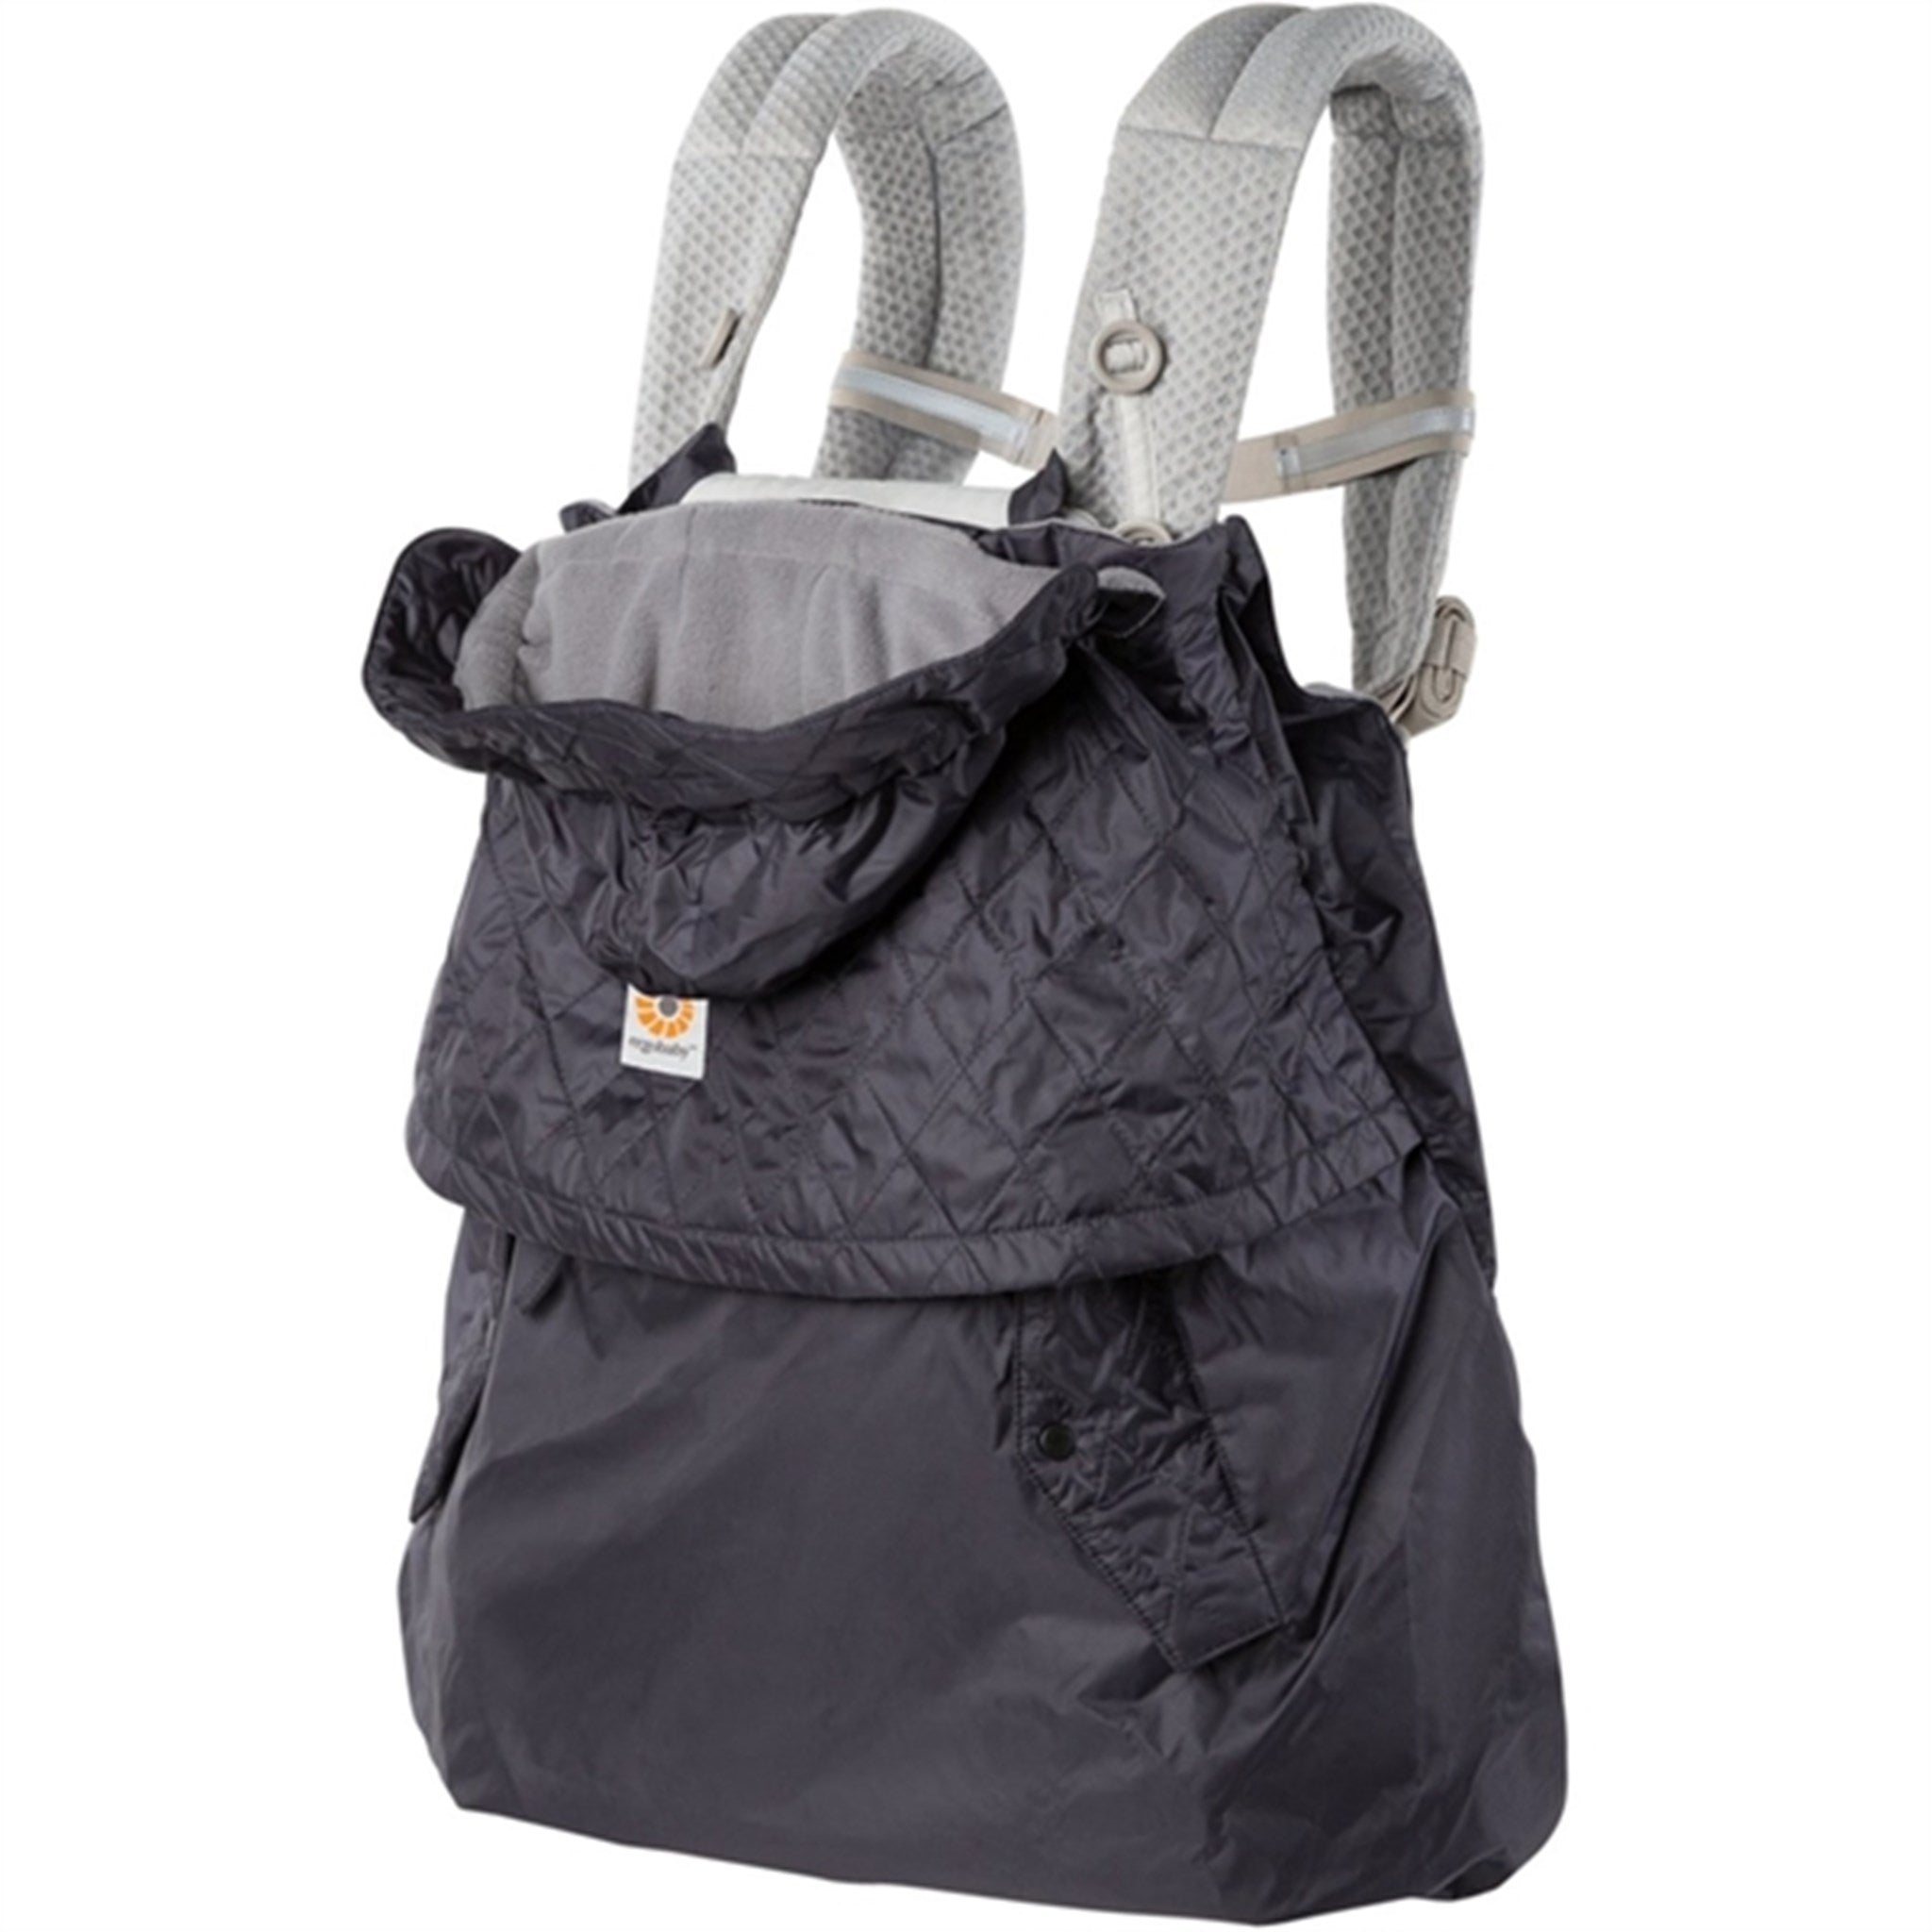 Ergobaby Cover Charcoal / Black